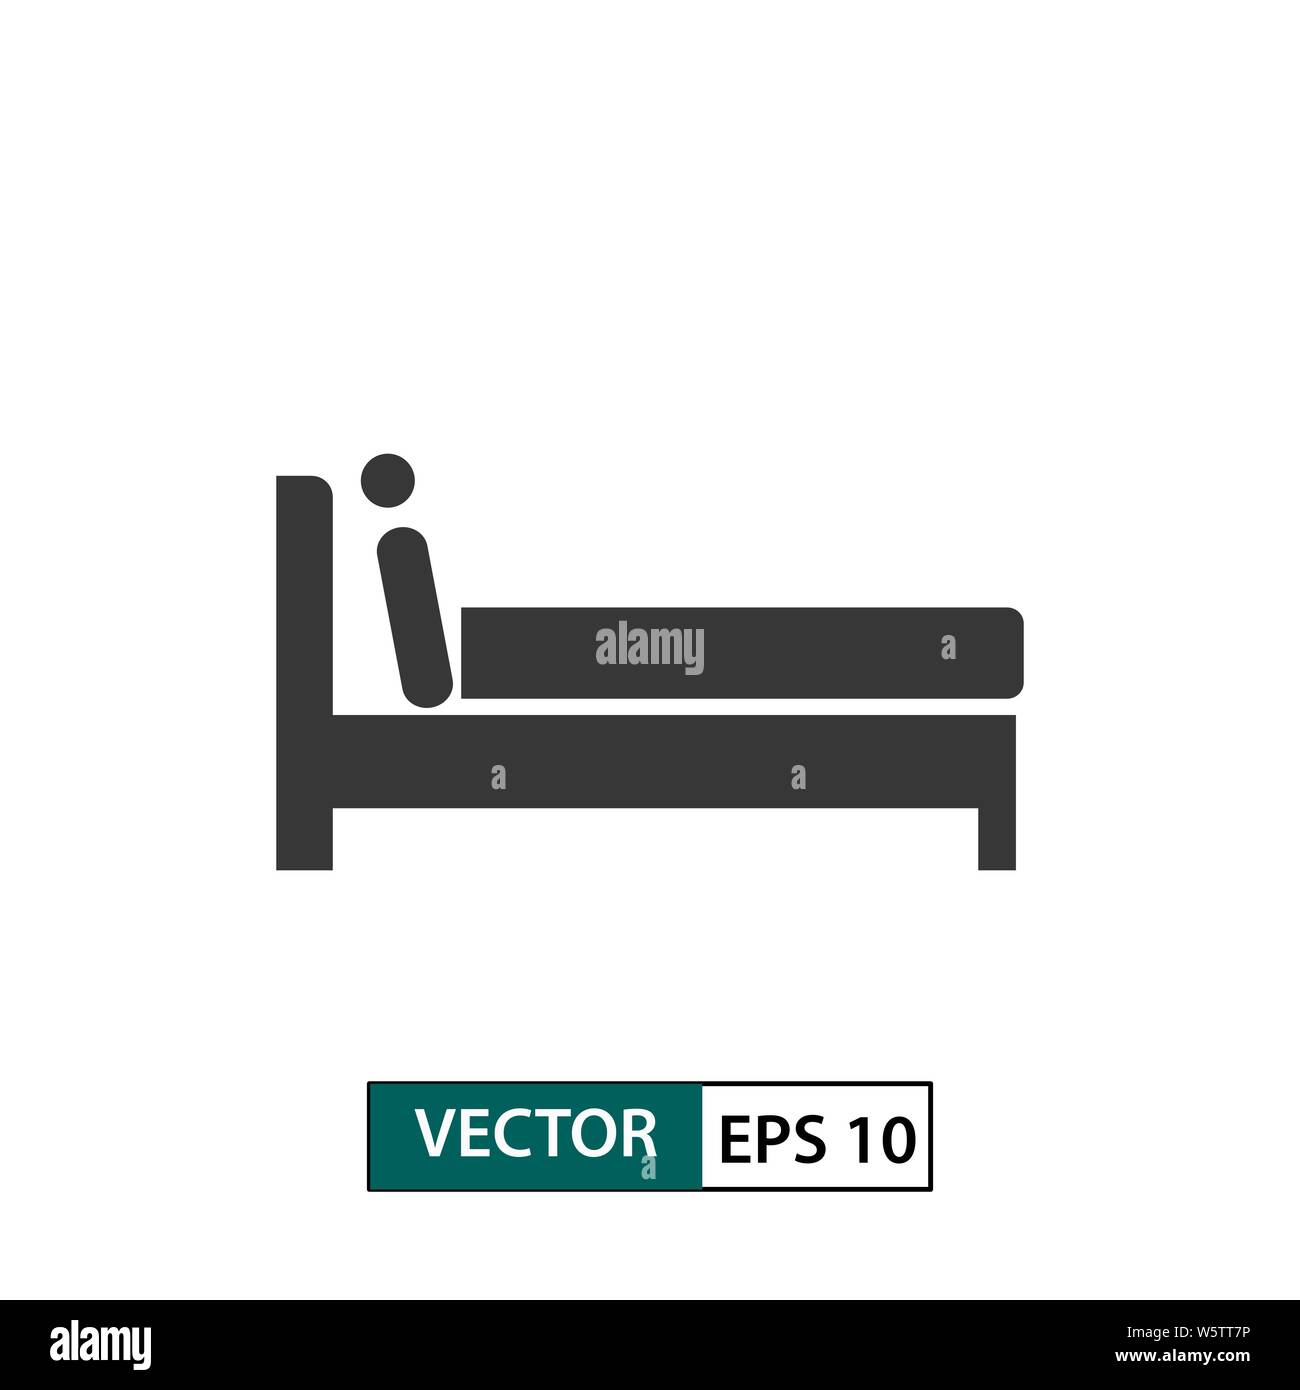 Man in bed icon. Isolated on white background. Vector illustration EPS 10 Stock Vector